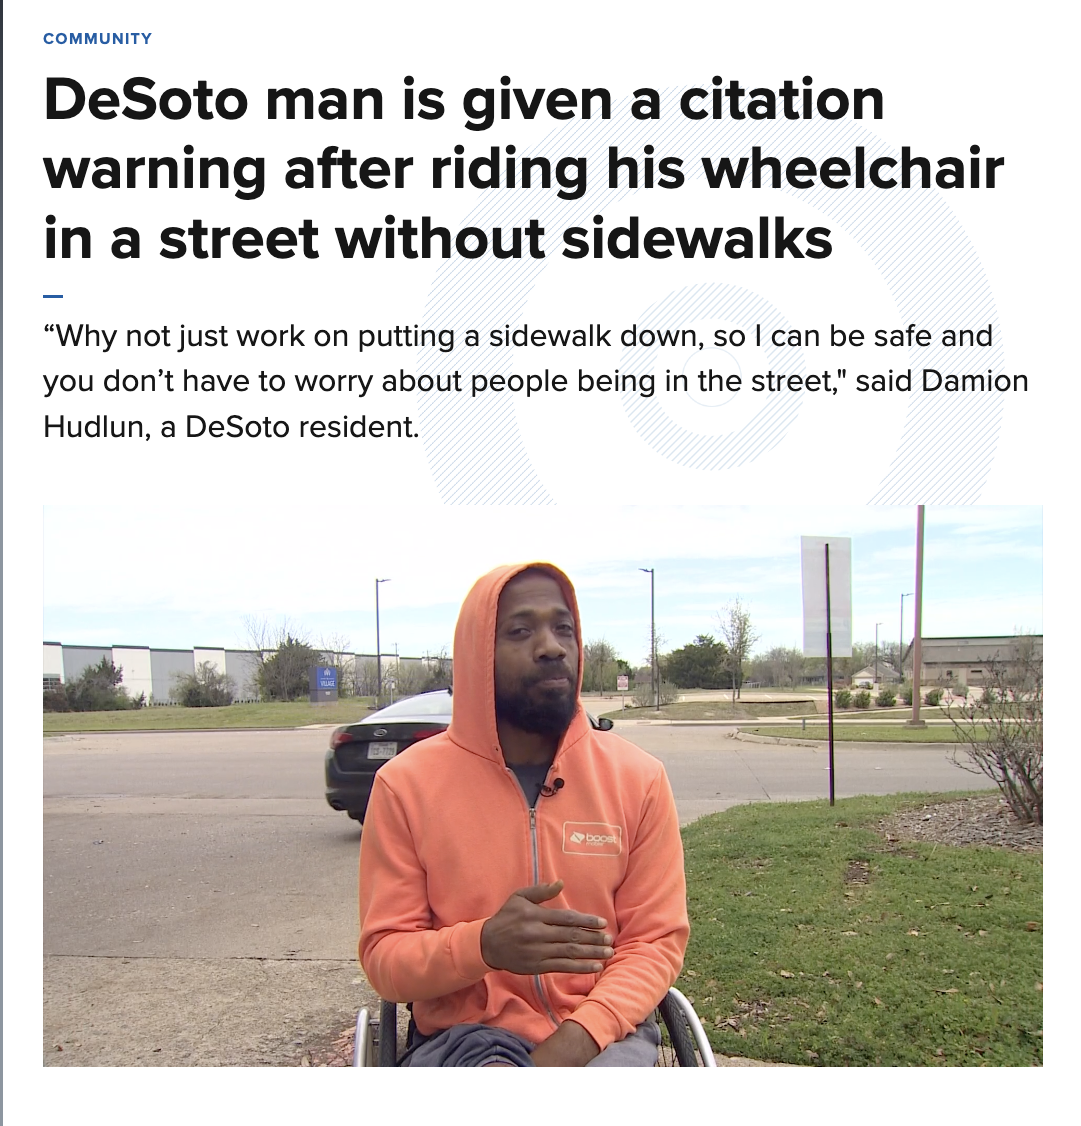 longport - Community DeSoto man is given a citation warning after riding his wheelchair in a street without sidewalks "Why not just work on putting a sidewalk down, so I can be safe and you don't have to worry about people being in the street," said Damio